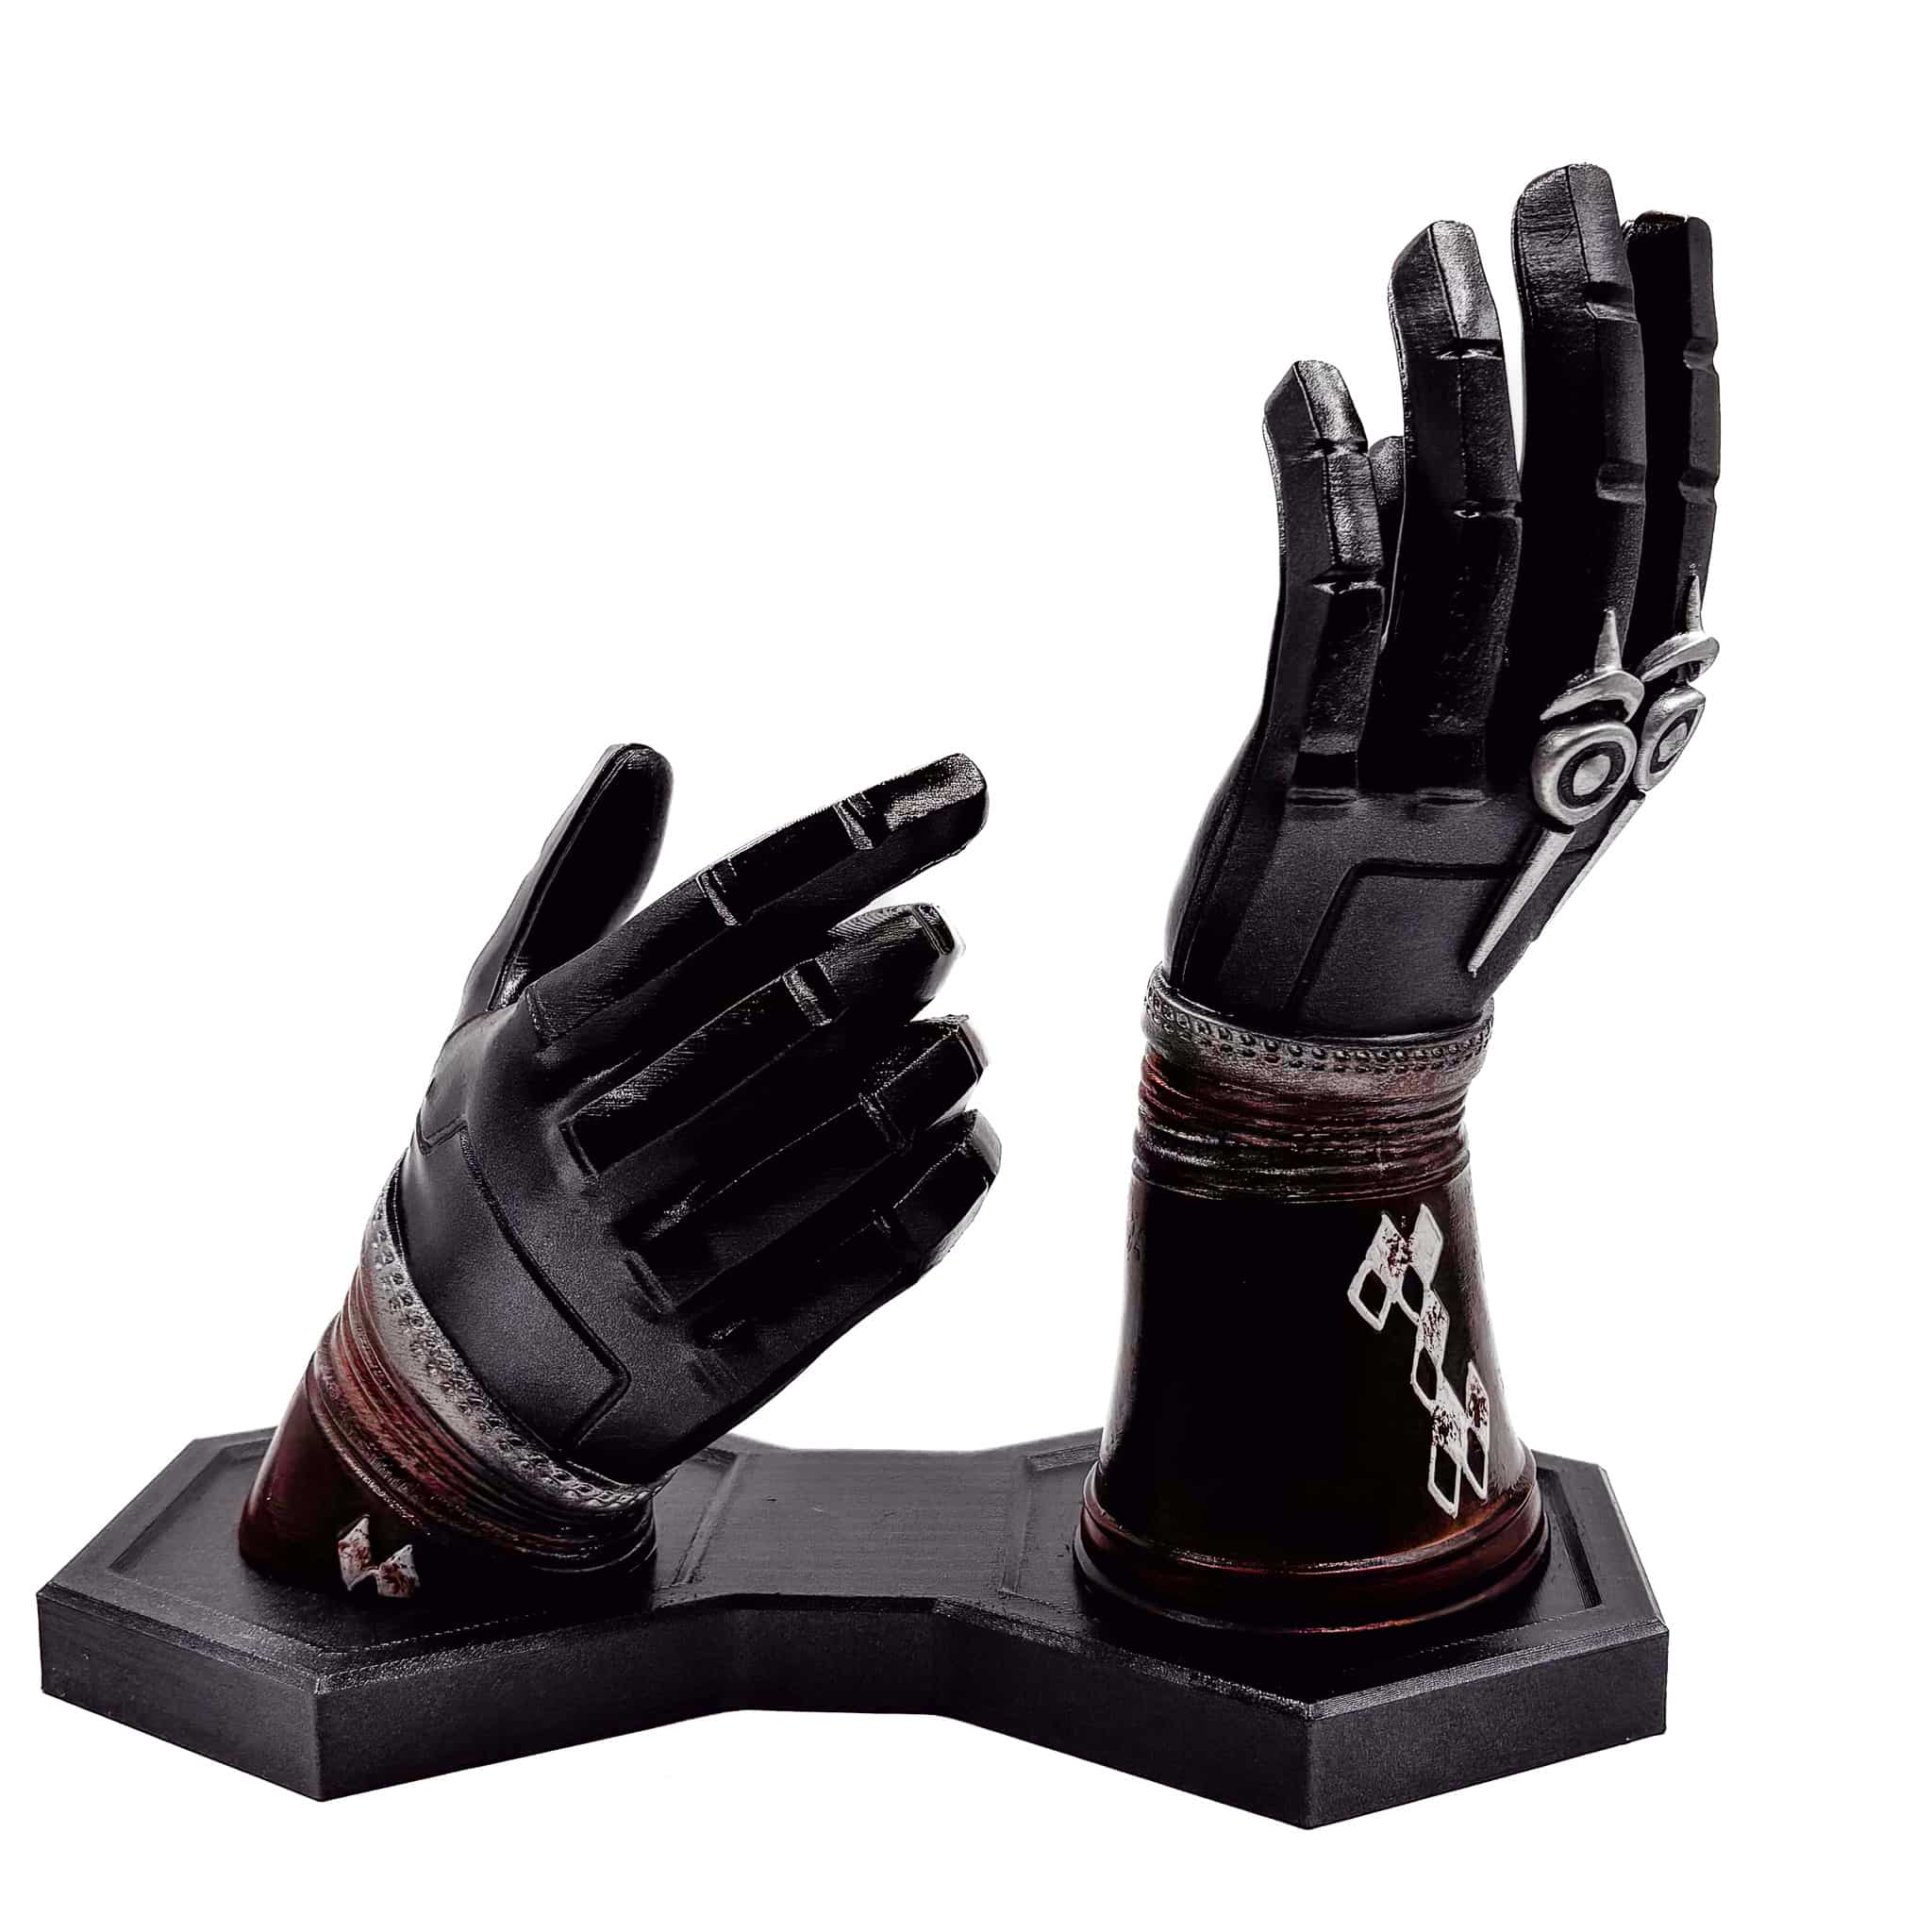 cayde 6 hands gloves stand with ace of spades replica gun by blasters4masters